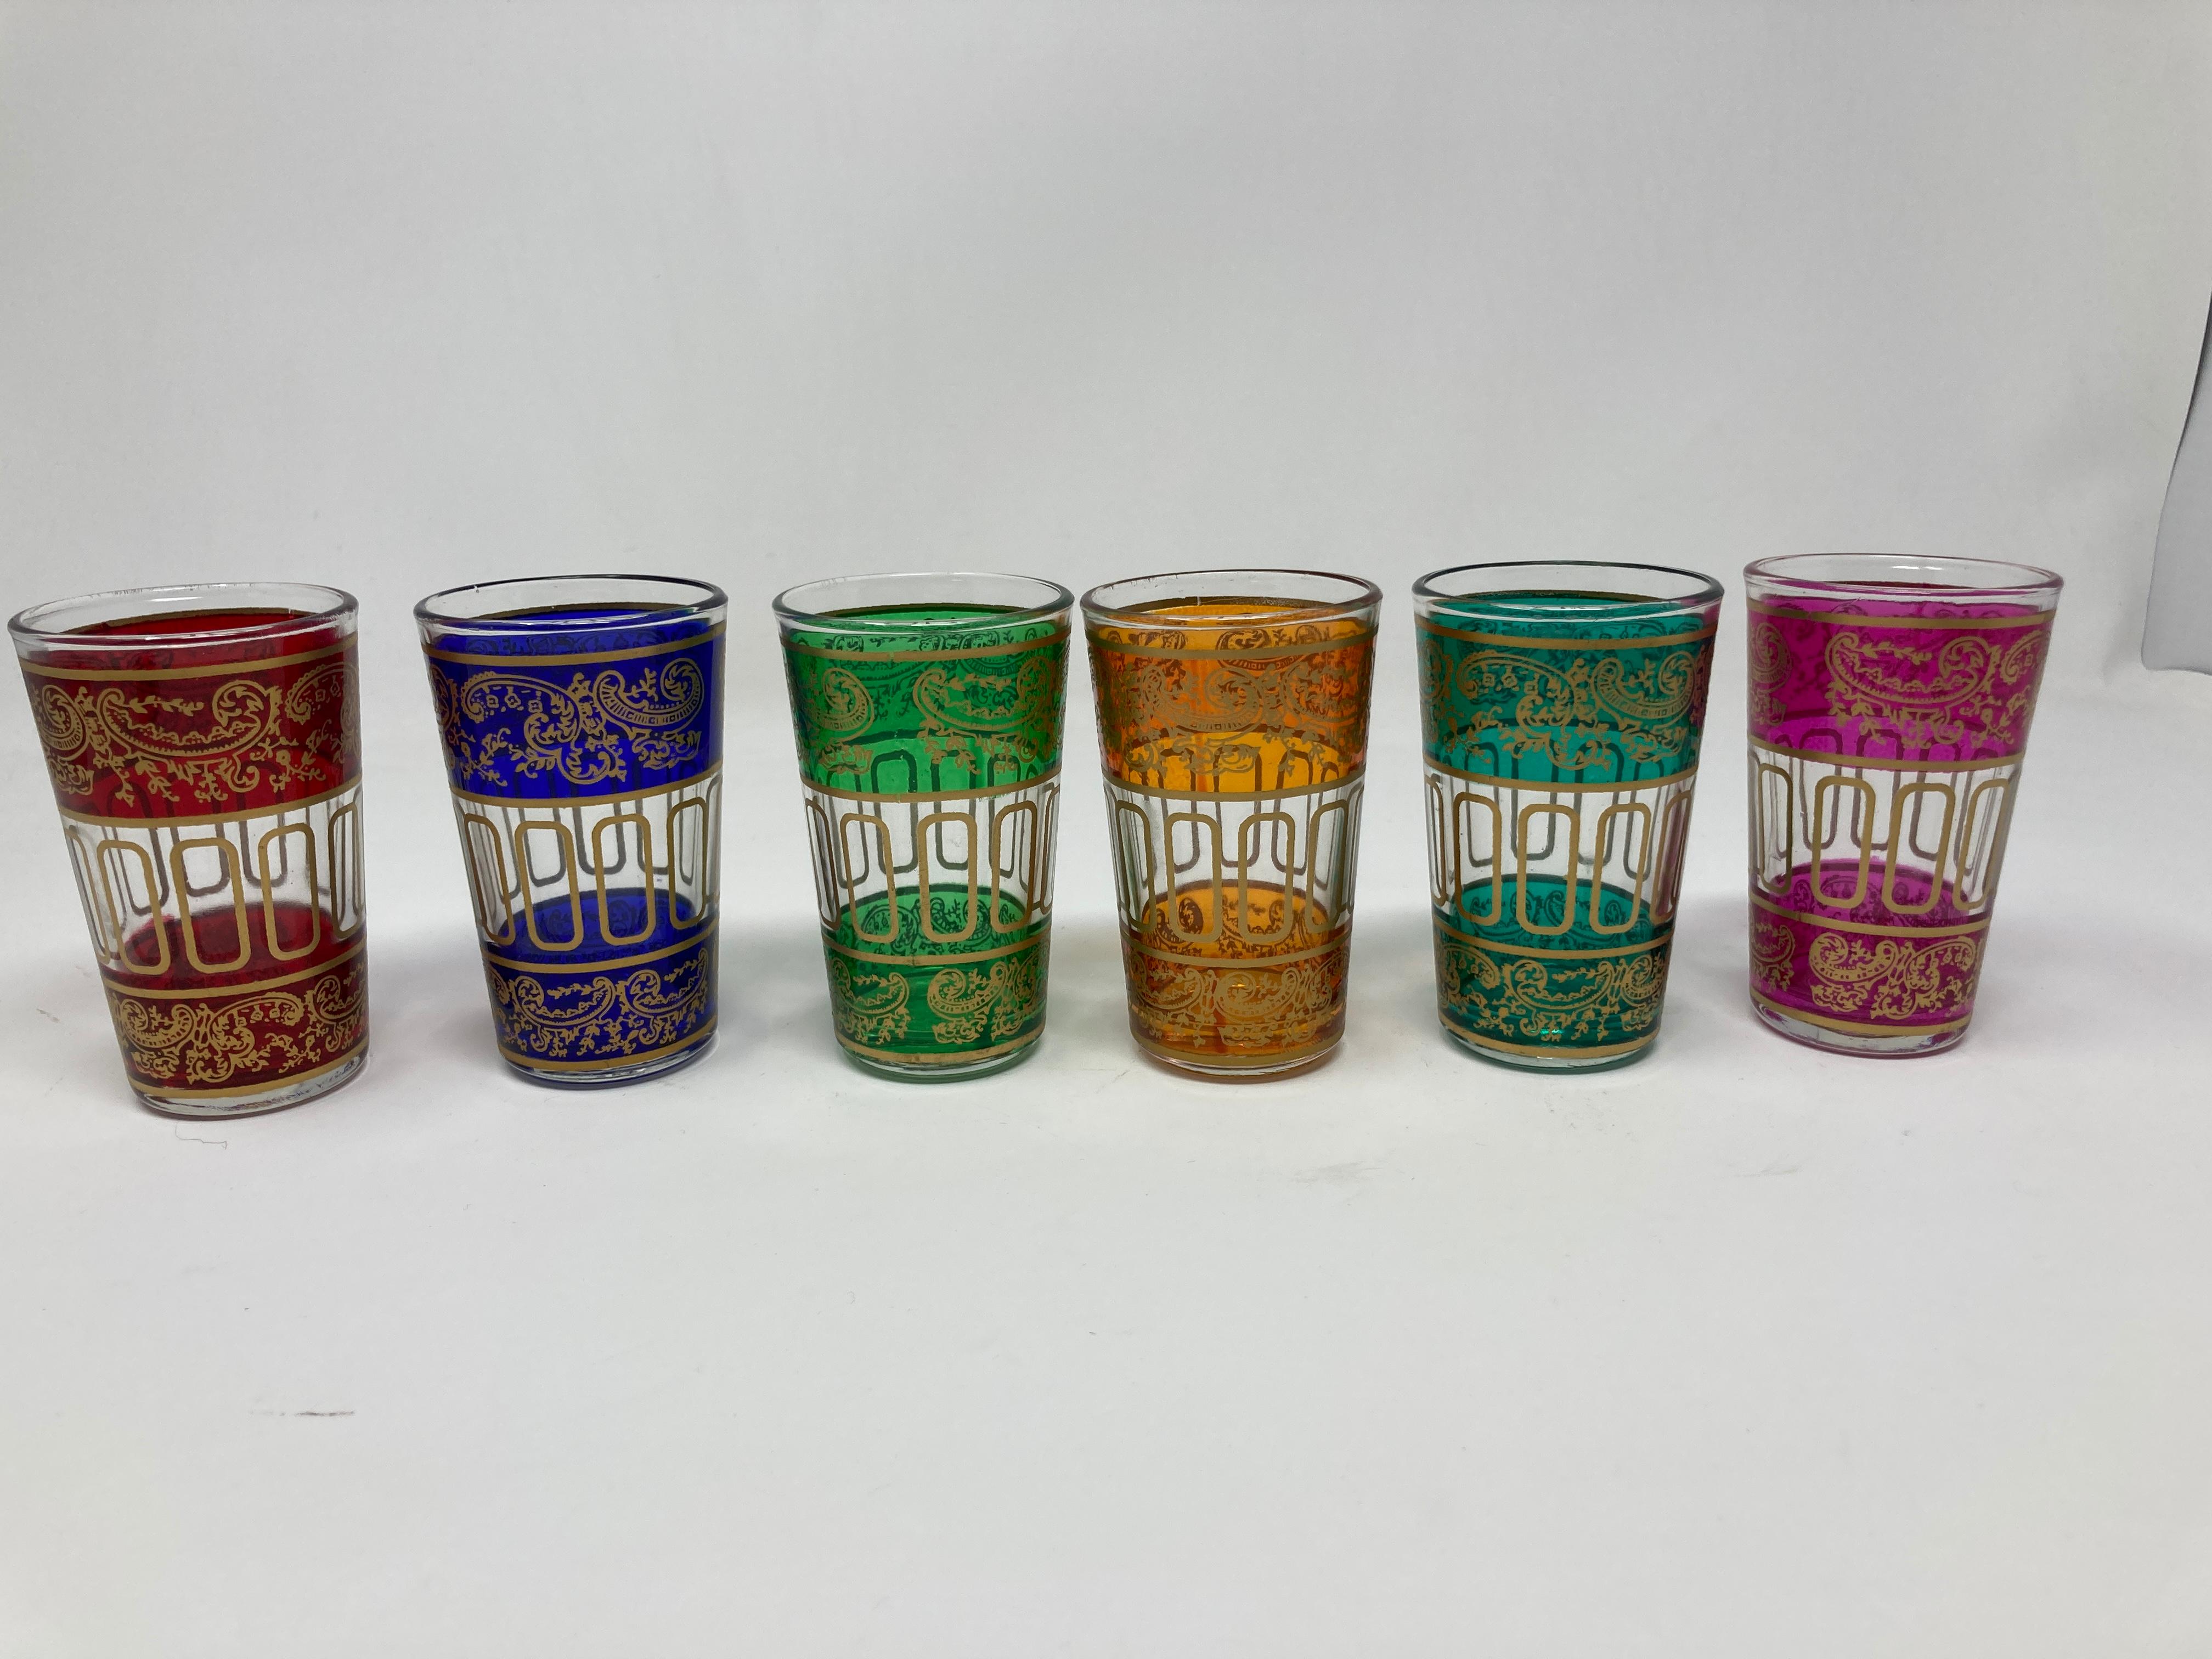 Set of six vintage Moroccan colored shot glasses with gold raised Moorish design.
Decorated with a classical gold and pattern Moorish frieze.
Use these elegant vintage shot glasses for Moroccan tea, or any hot or cold drink.
Perfect for the